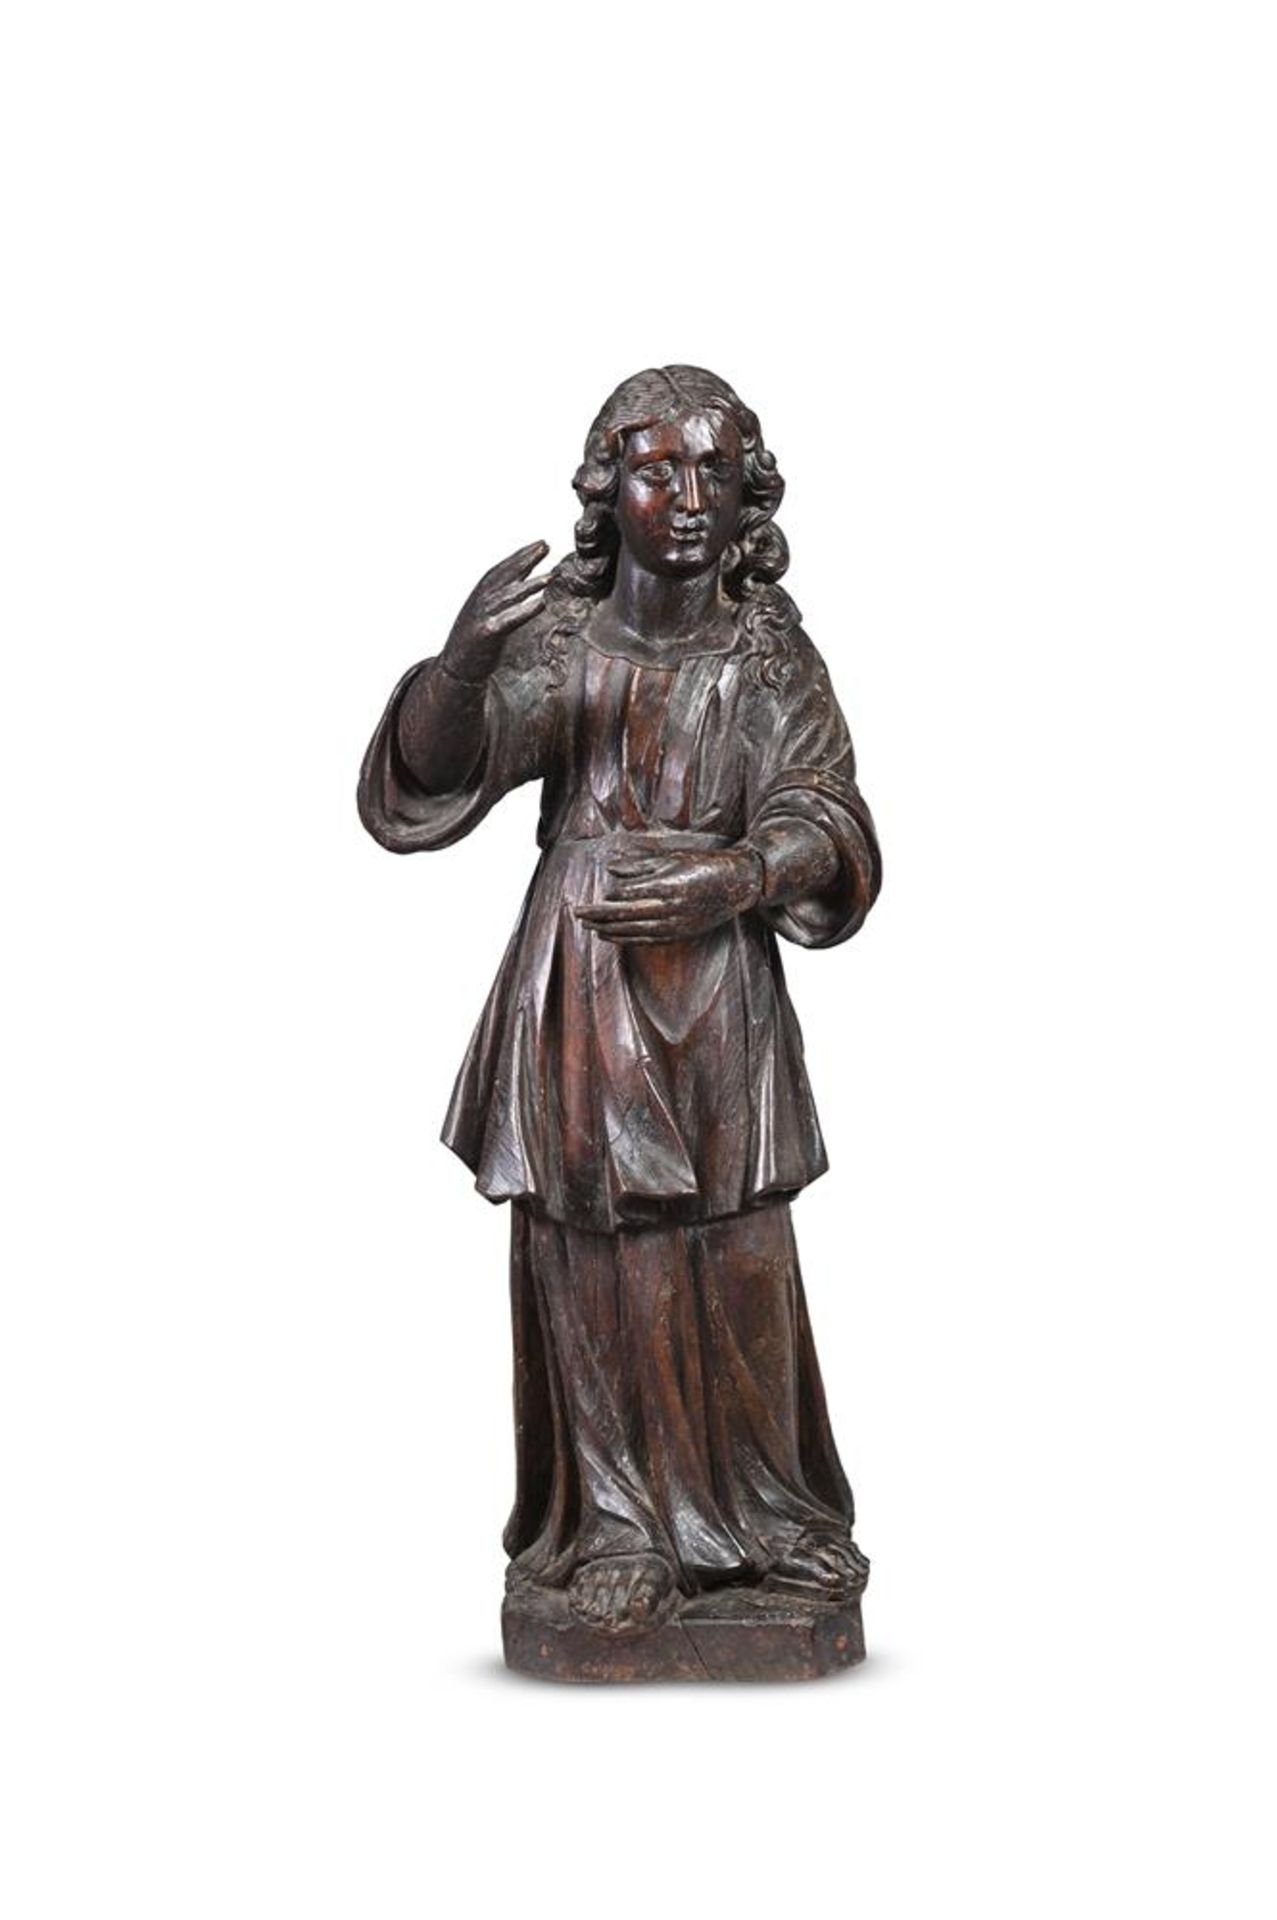 A NORTH EUROPEAN CARVED OAK FIGURE OF A SAINT OR AN APOSTLE, LATE 17TH OR EARLY 18TH CENTURY